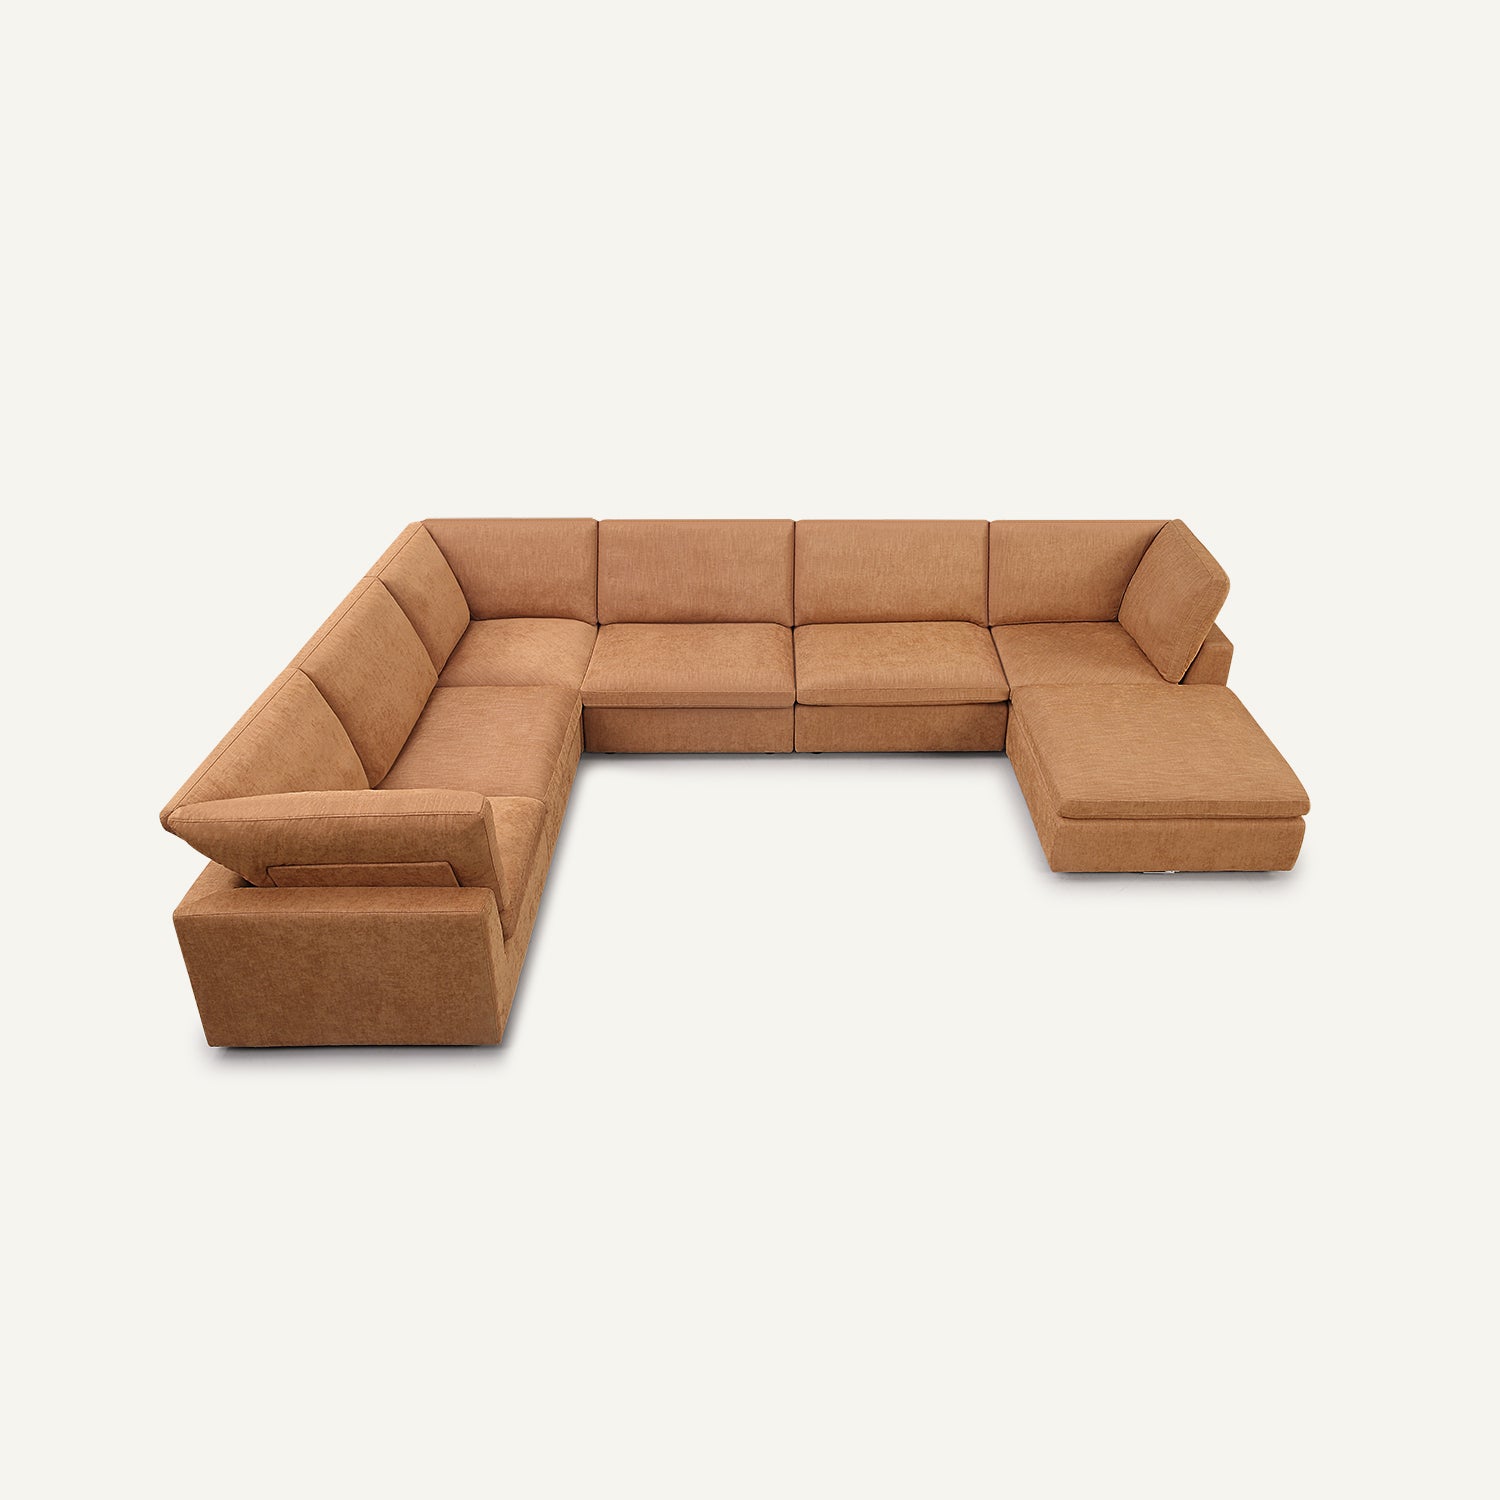 Cloud Tan Linen 6-Seat Corner Sectional with Ottoman